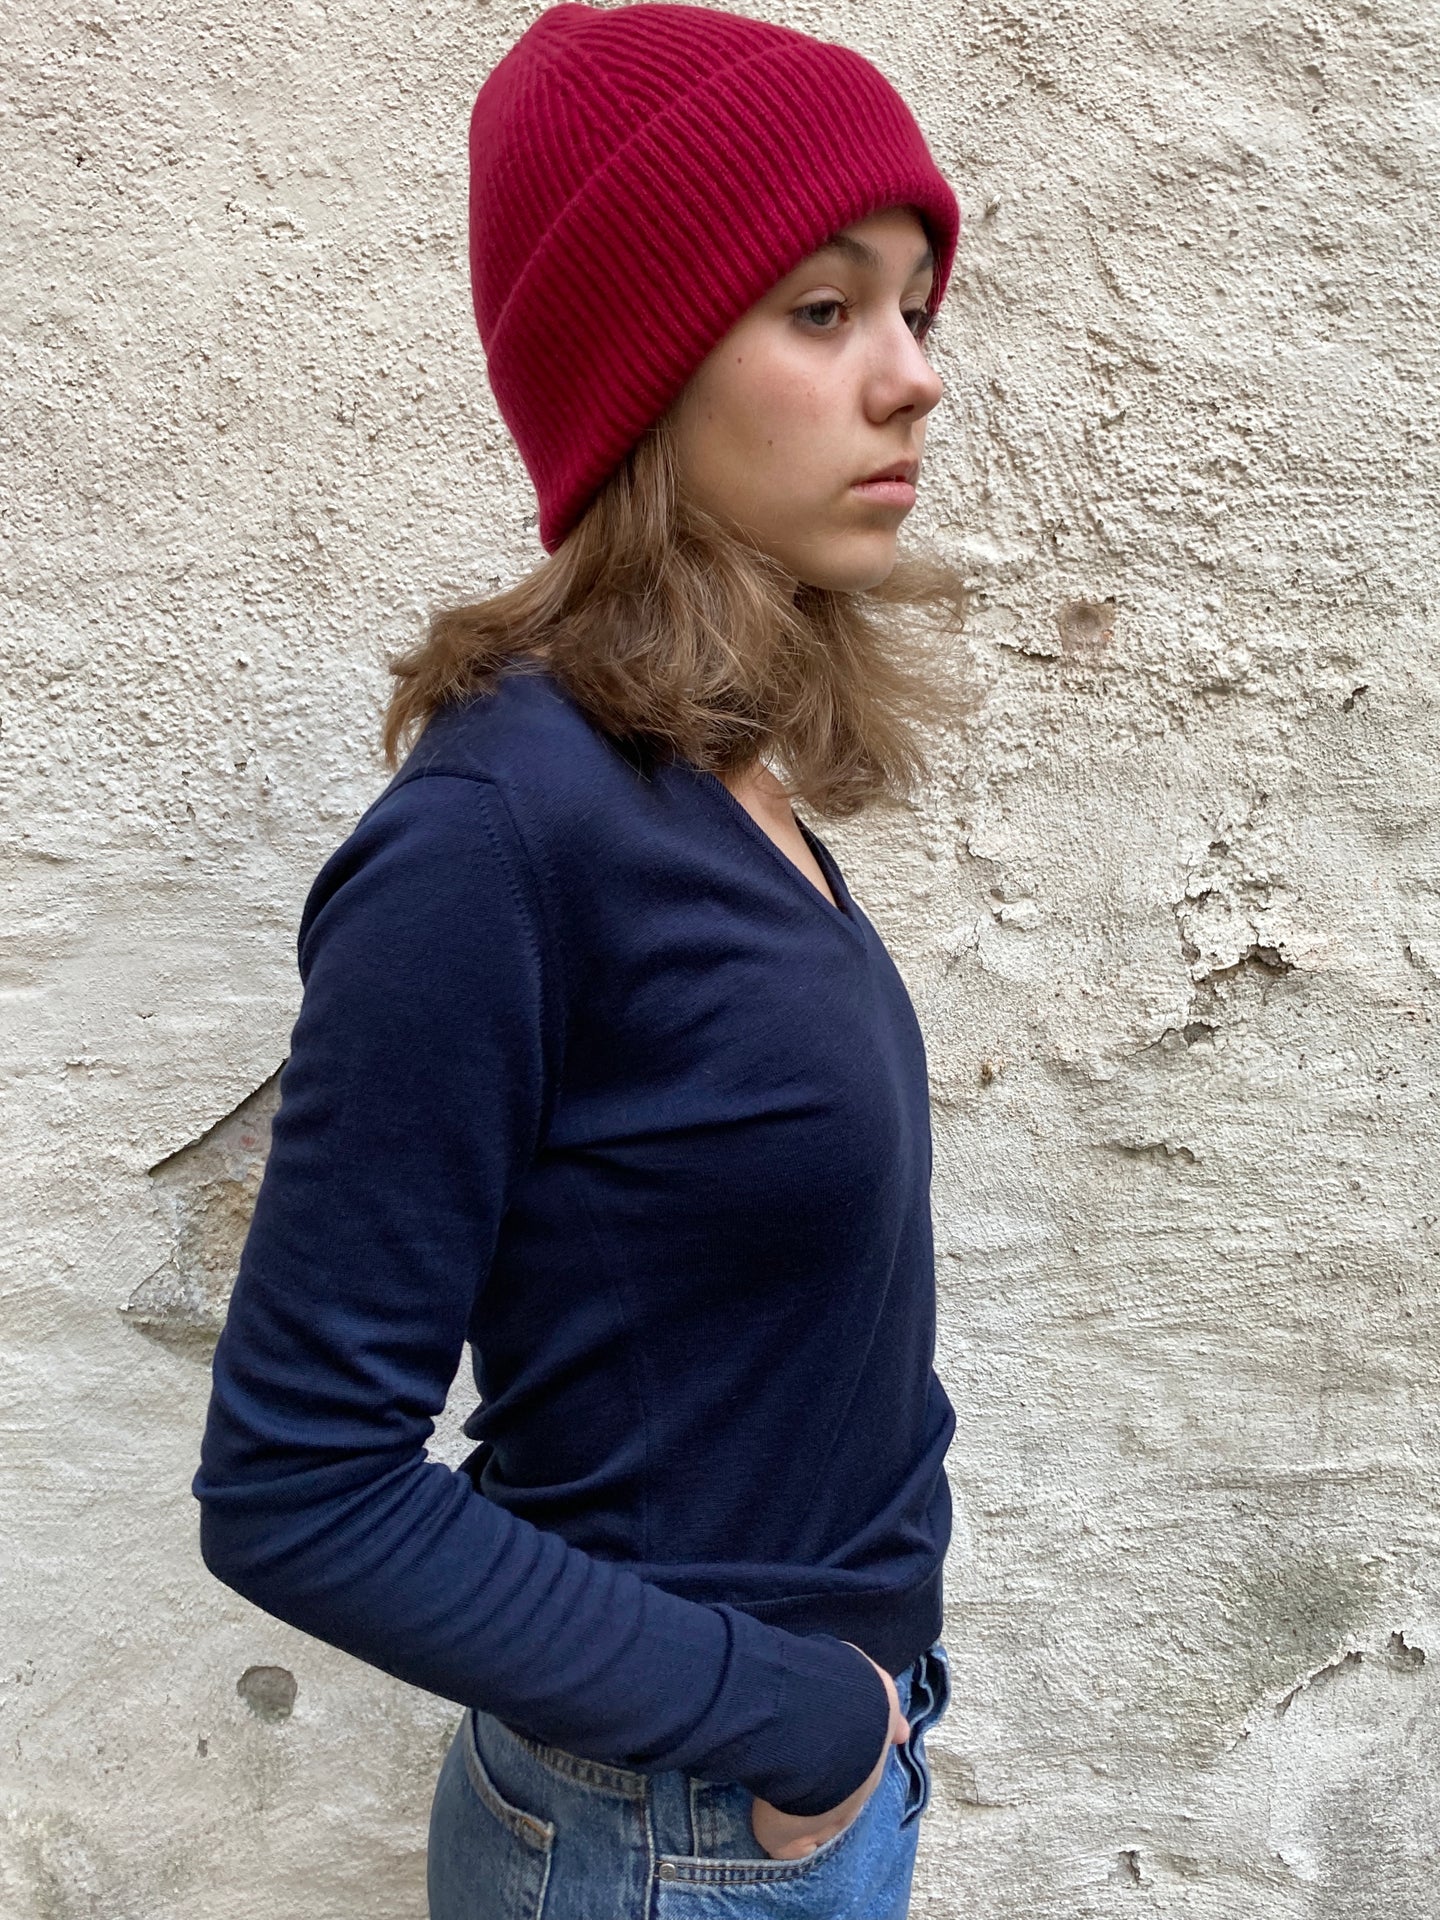 House of Scotland Cashmere Beanie Ladybird Red